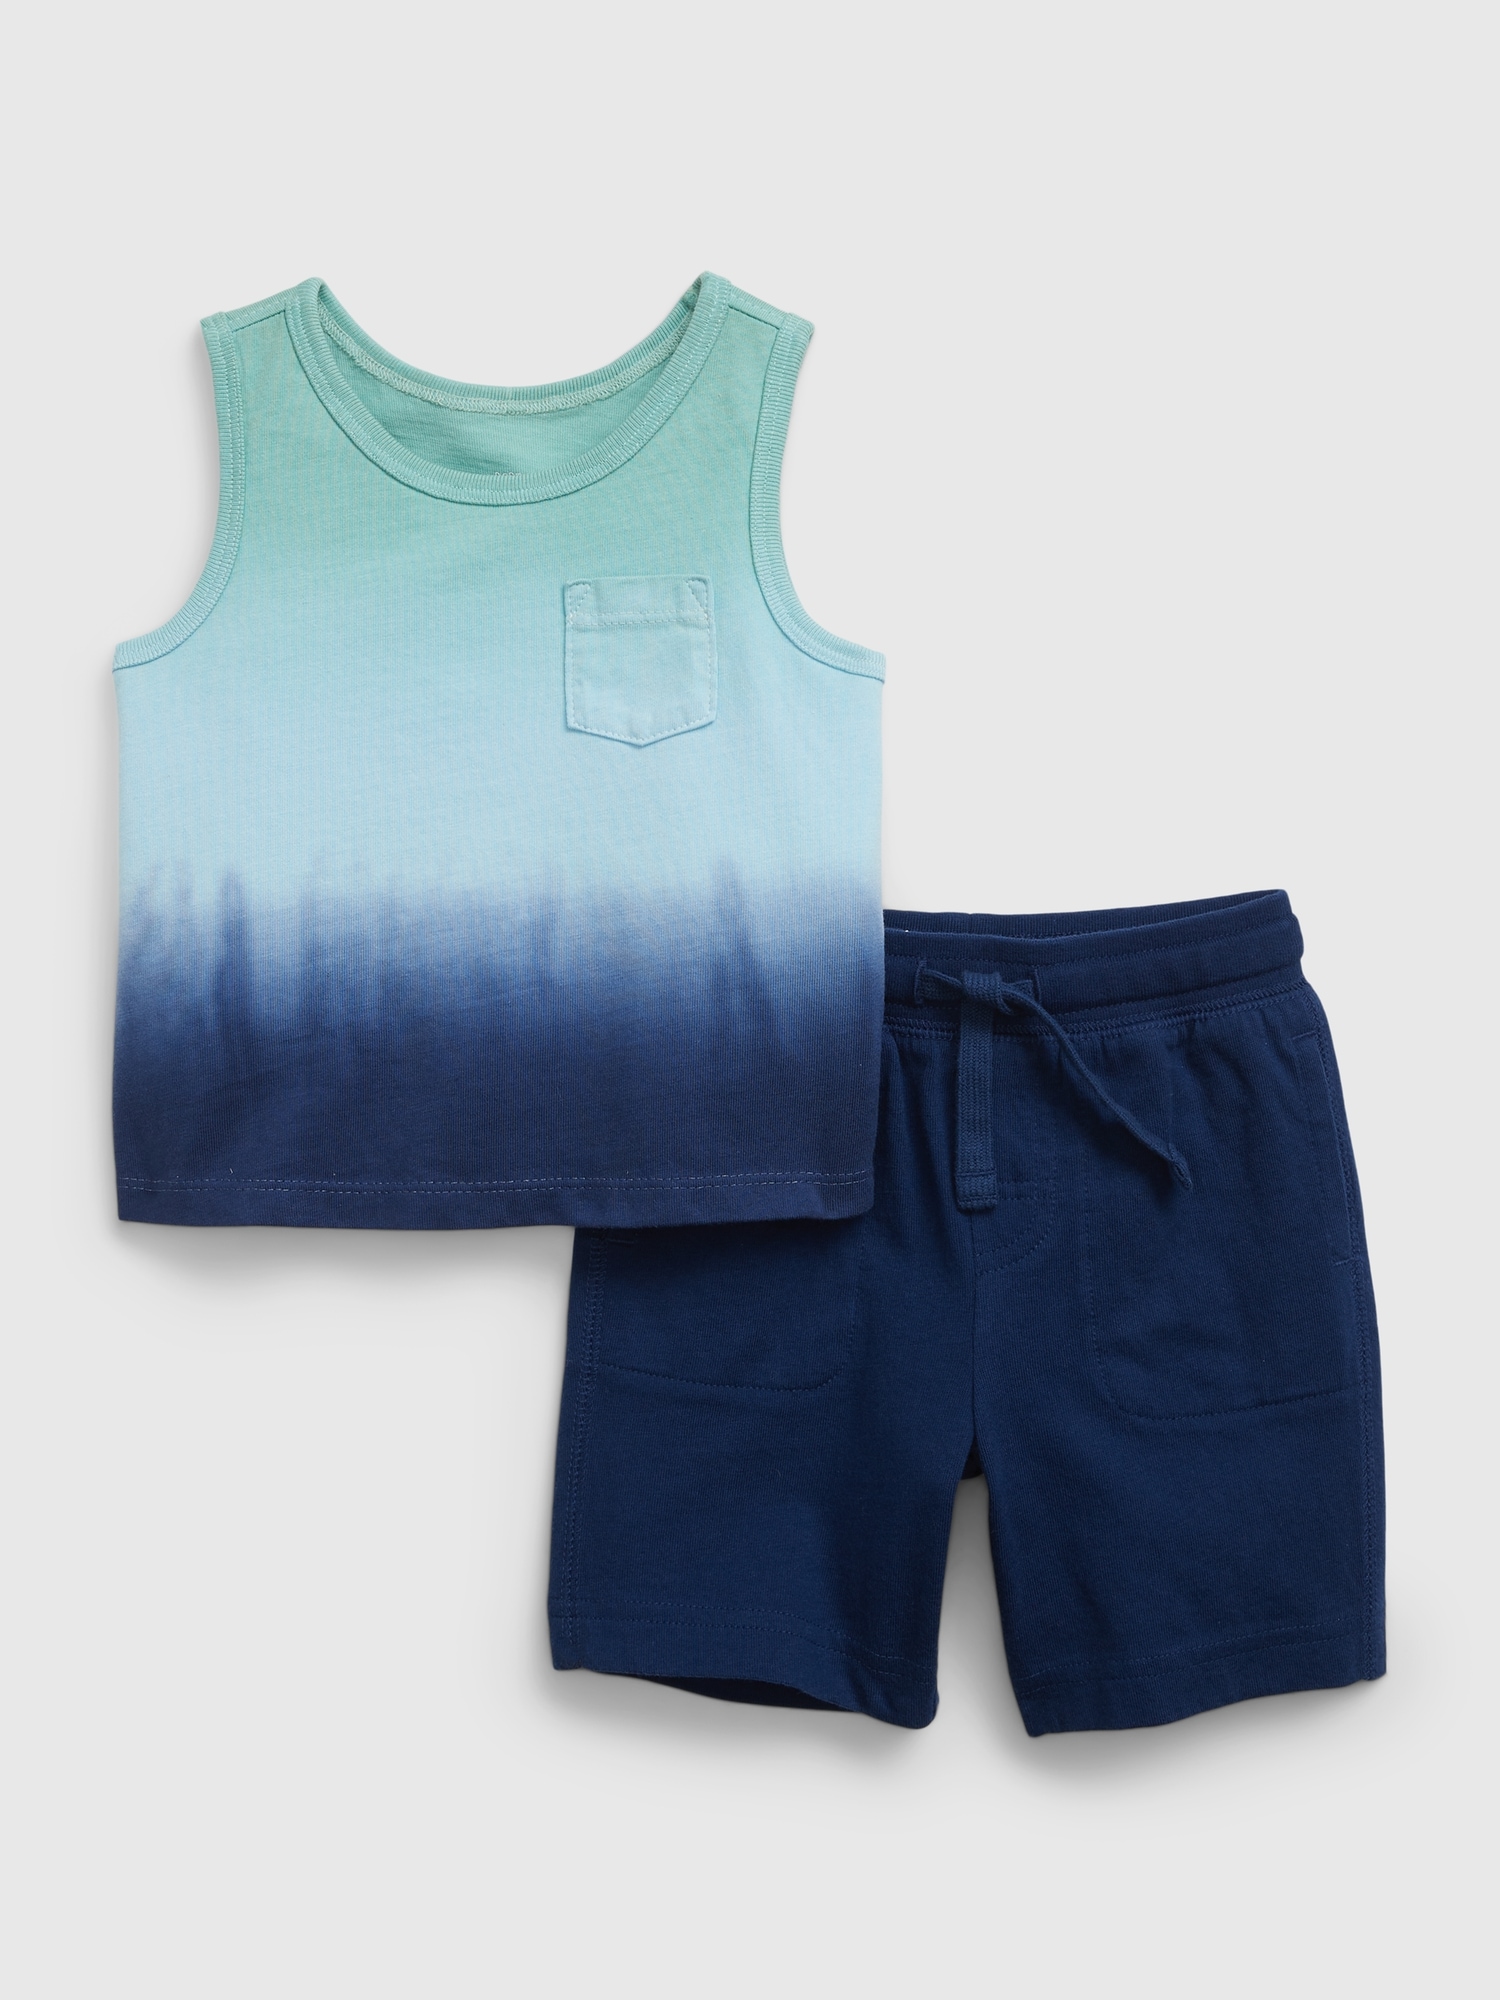 Baby Organic Cotton Tank & Shorts Outfit Set